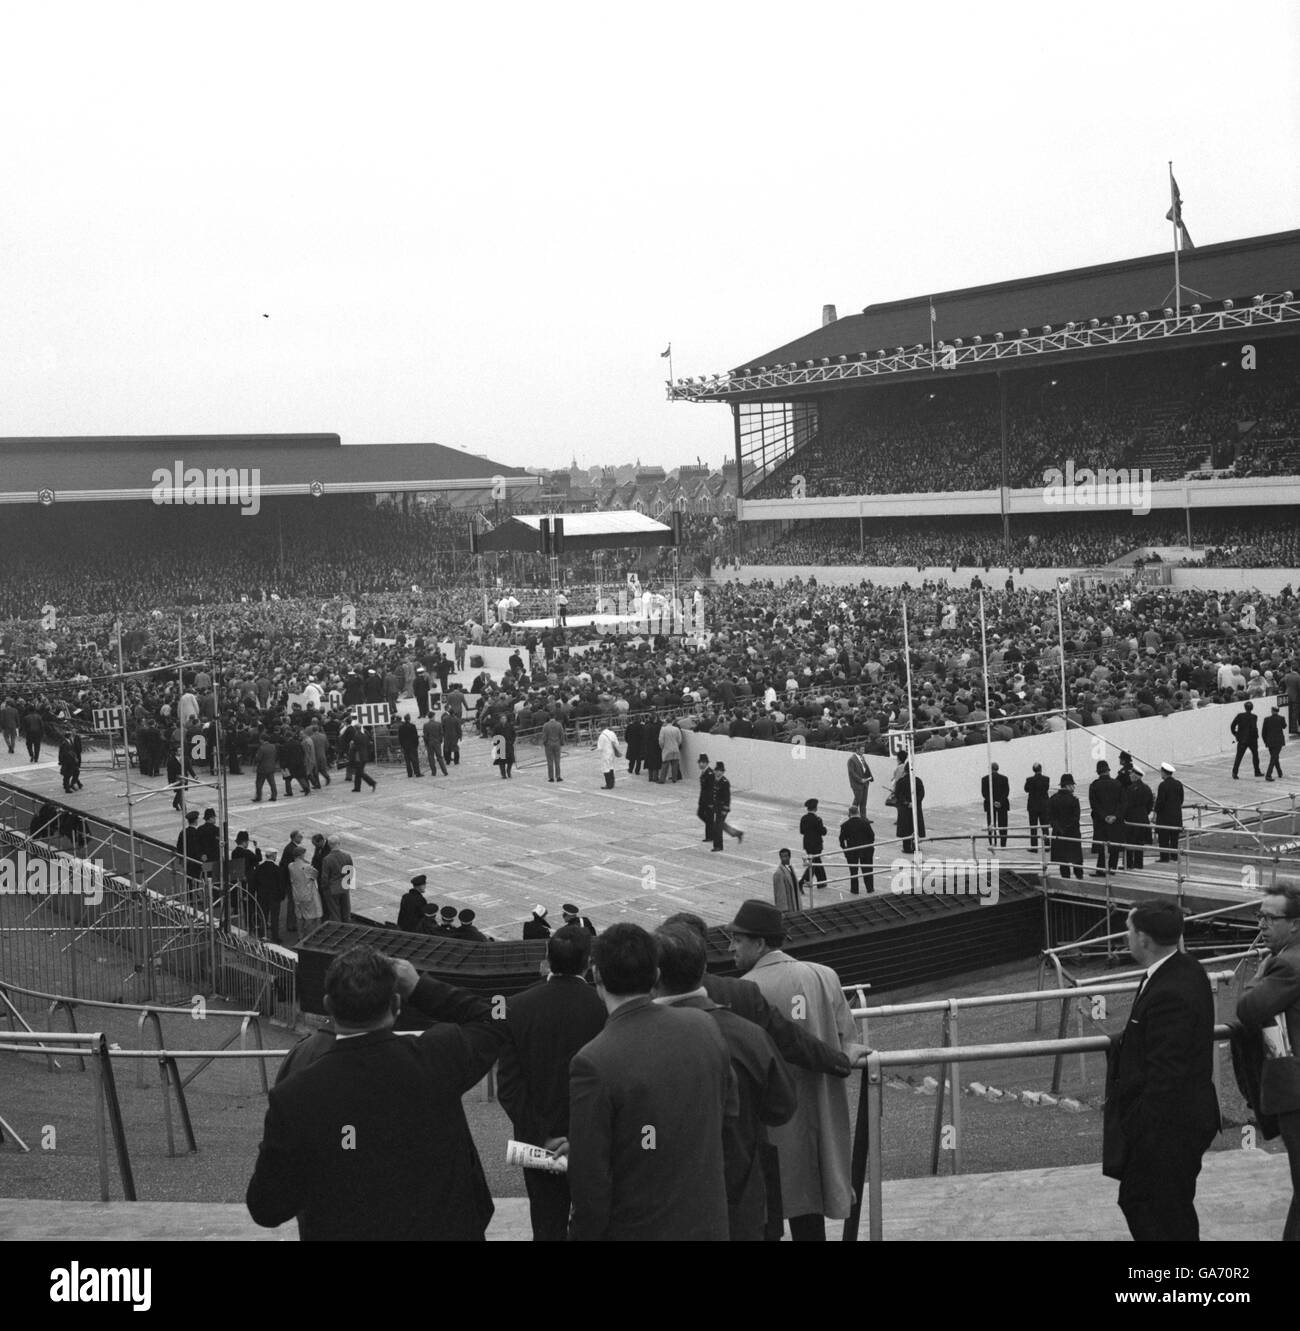 The scene is set for the fight of the century, the ring is ready, the crowds are there, all agog for the start of the world heavyweight championship between Muhammad Ali (Cassius Clay) and Henry Cooper at the Arsenal Stadium in Highbury. Stock Photo